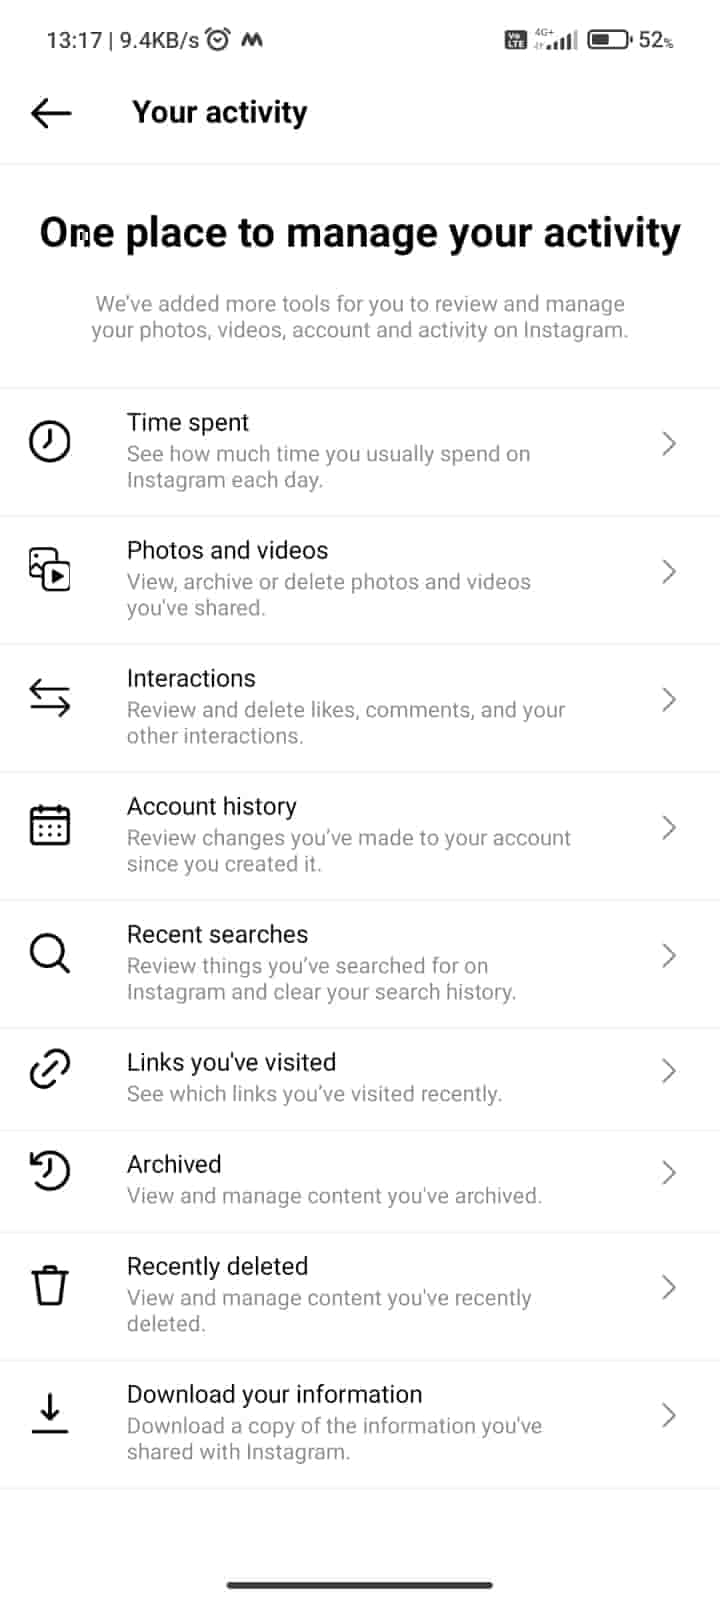 how to restore deleted instagram content, recently deleted instagram content, recently deleted feature, how to recover deleted instagram image, how to restore deleted instagram reel